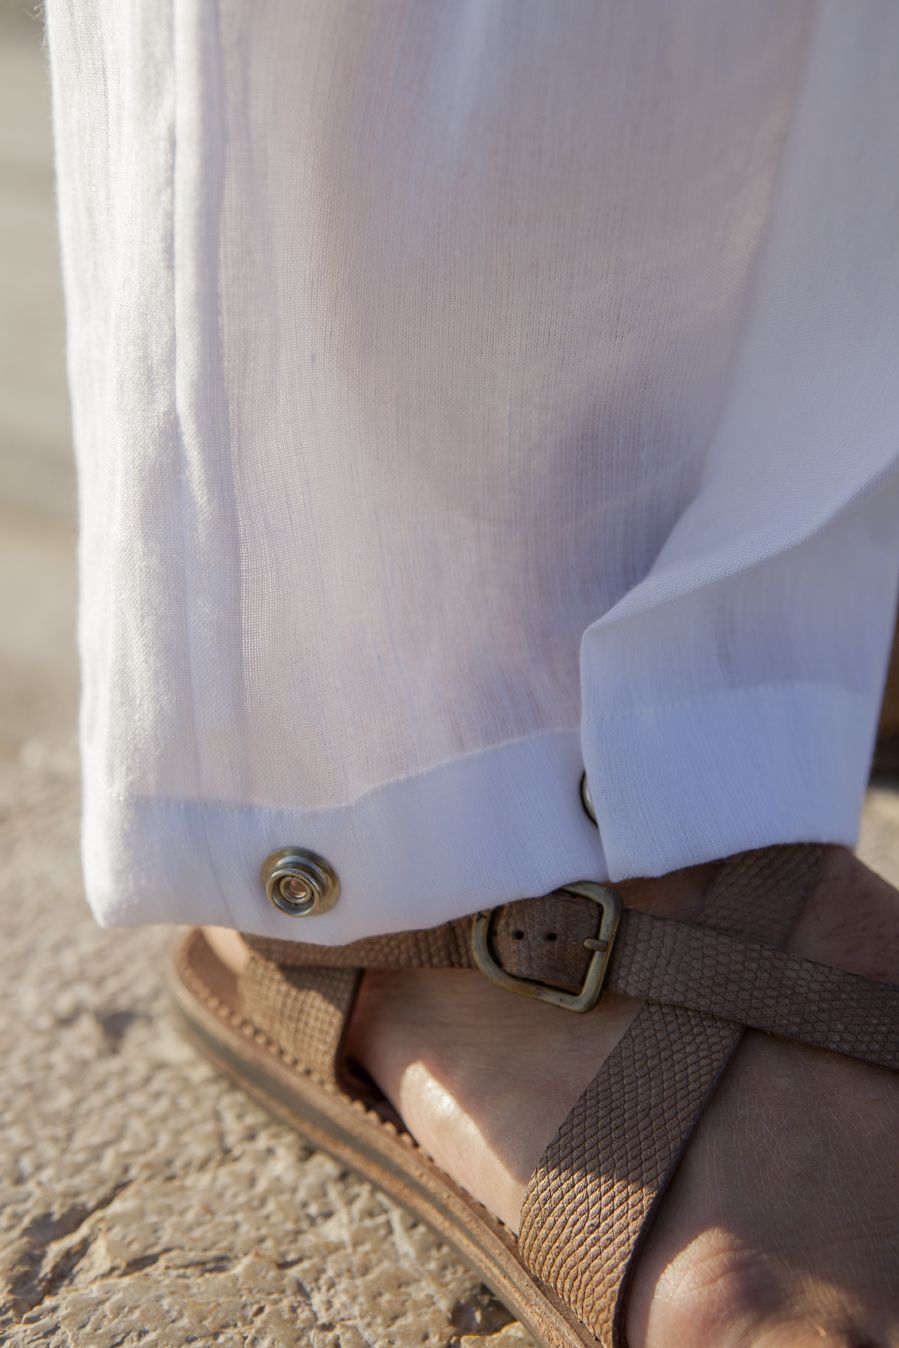 Z46-Linen trousers and shirt in an adlib style - Ordenar por